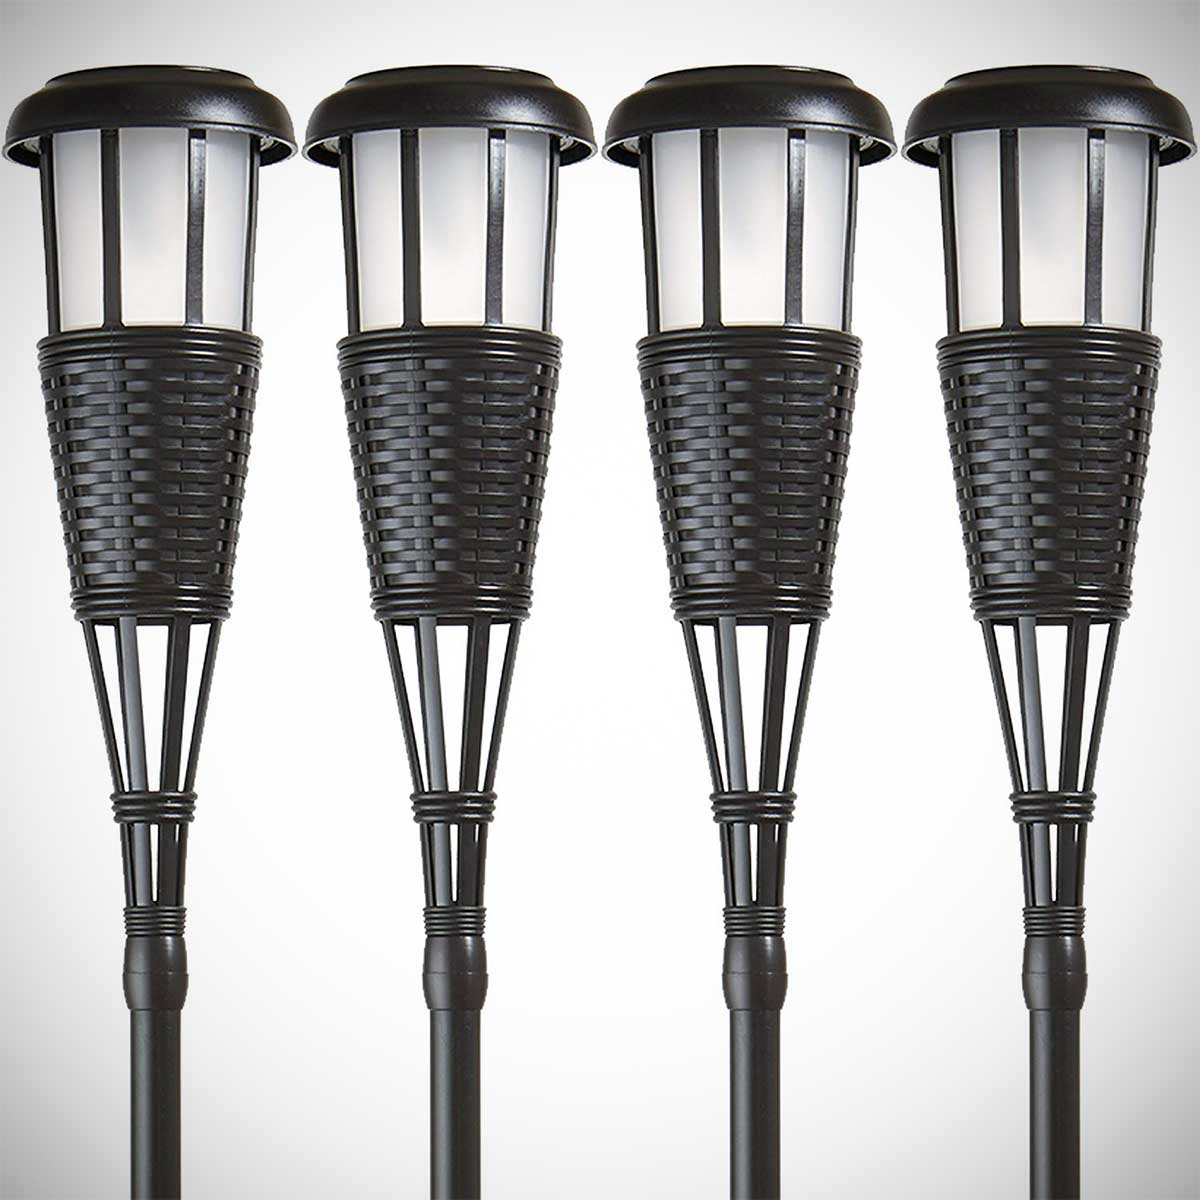 Newhouse Lighting - Solar Flickering Torches